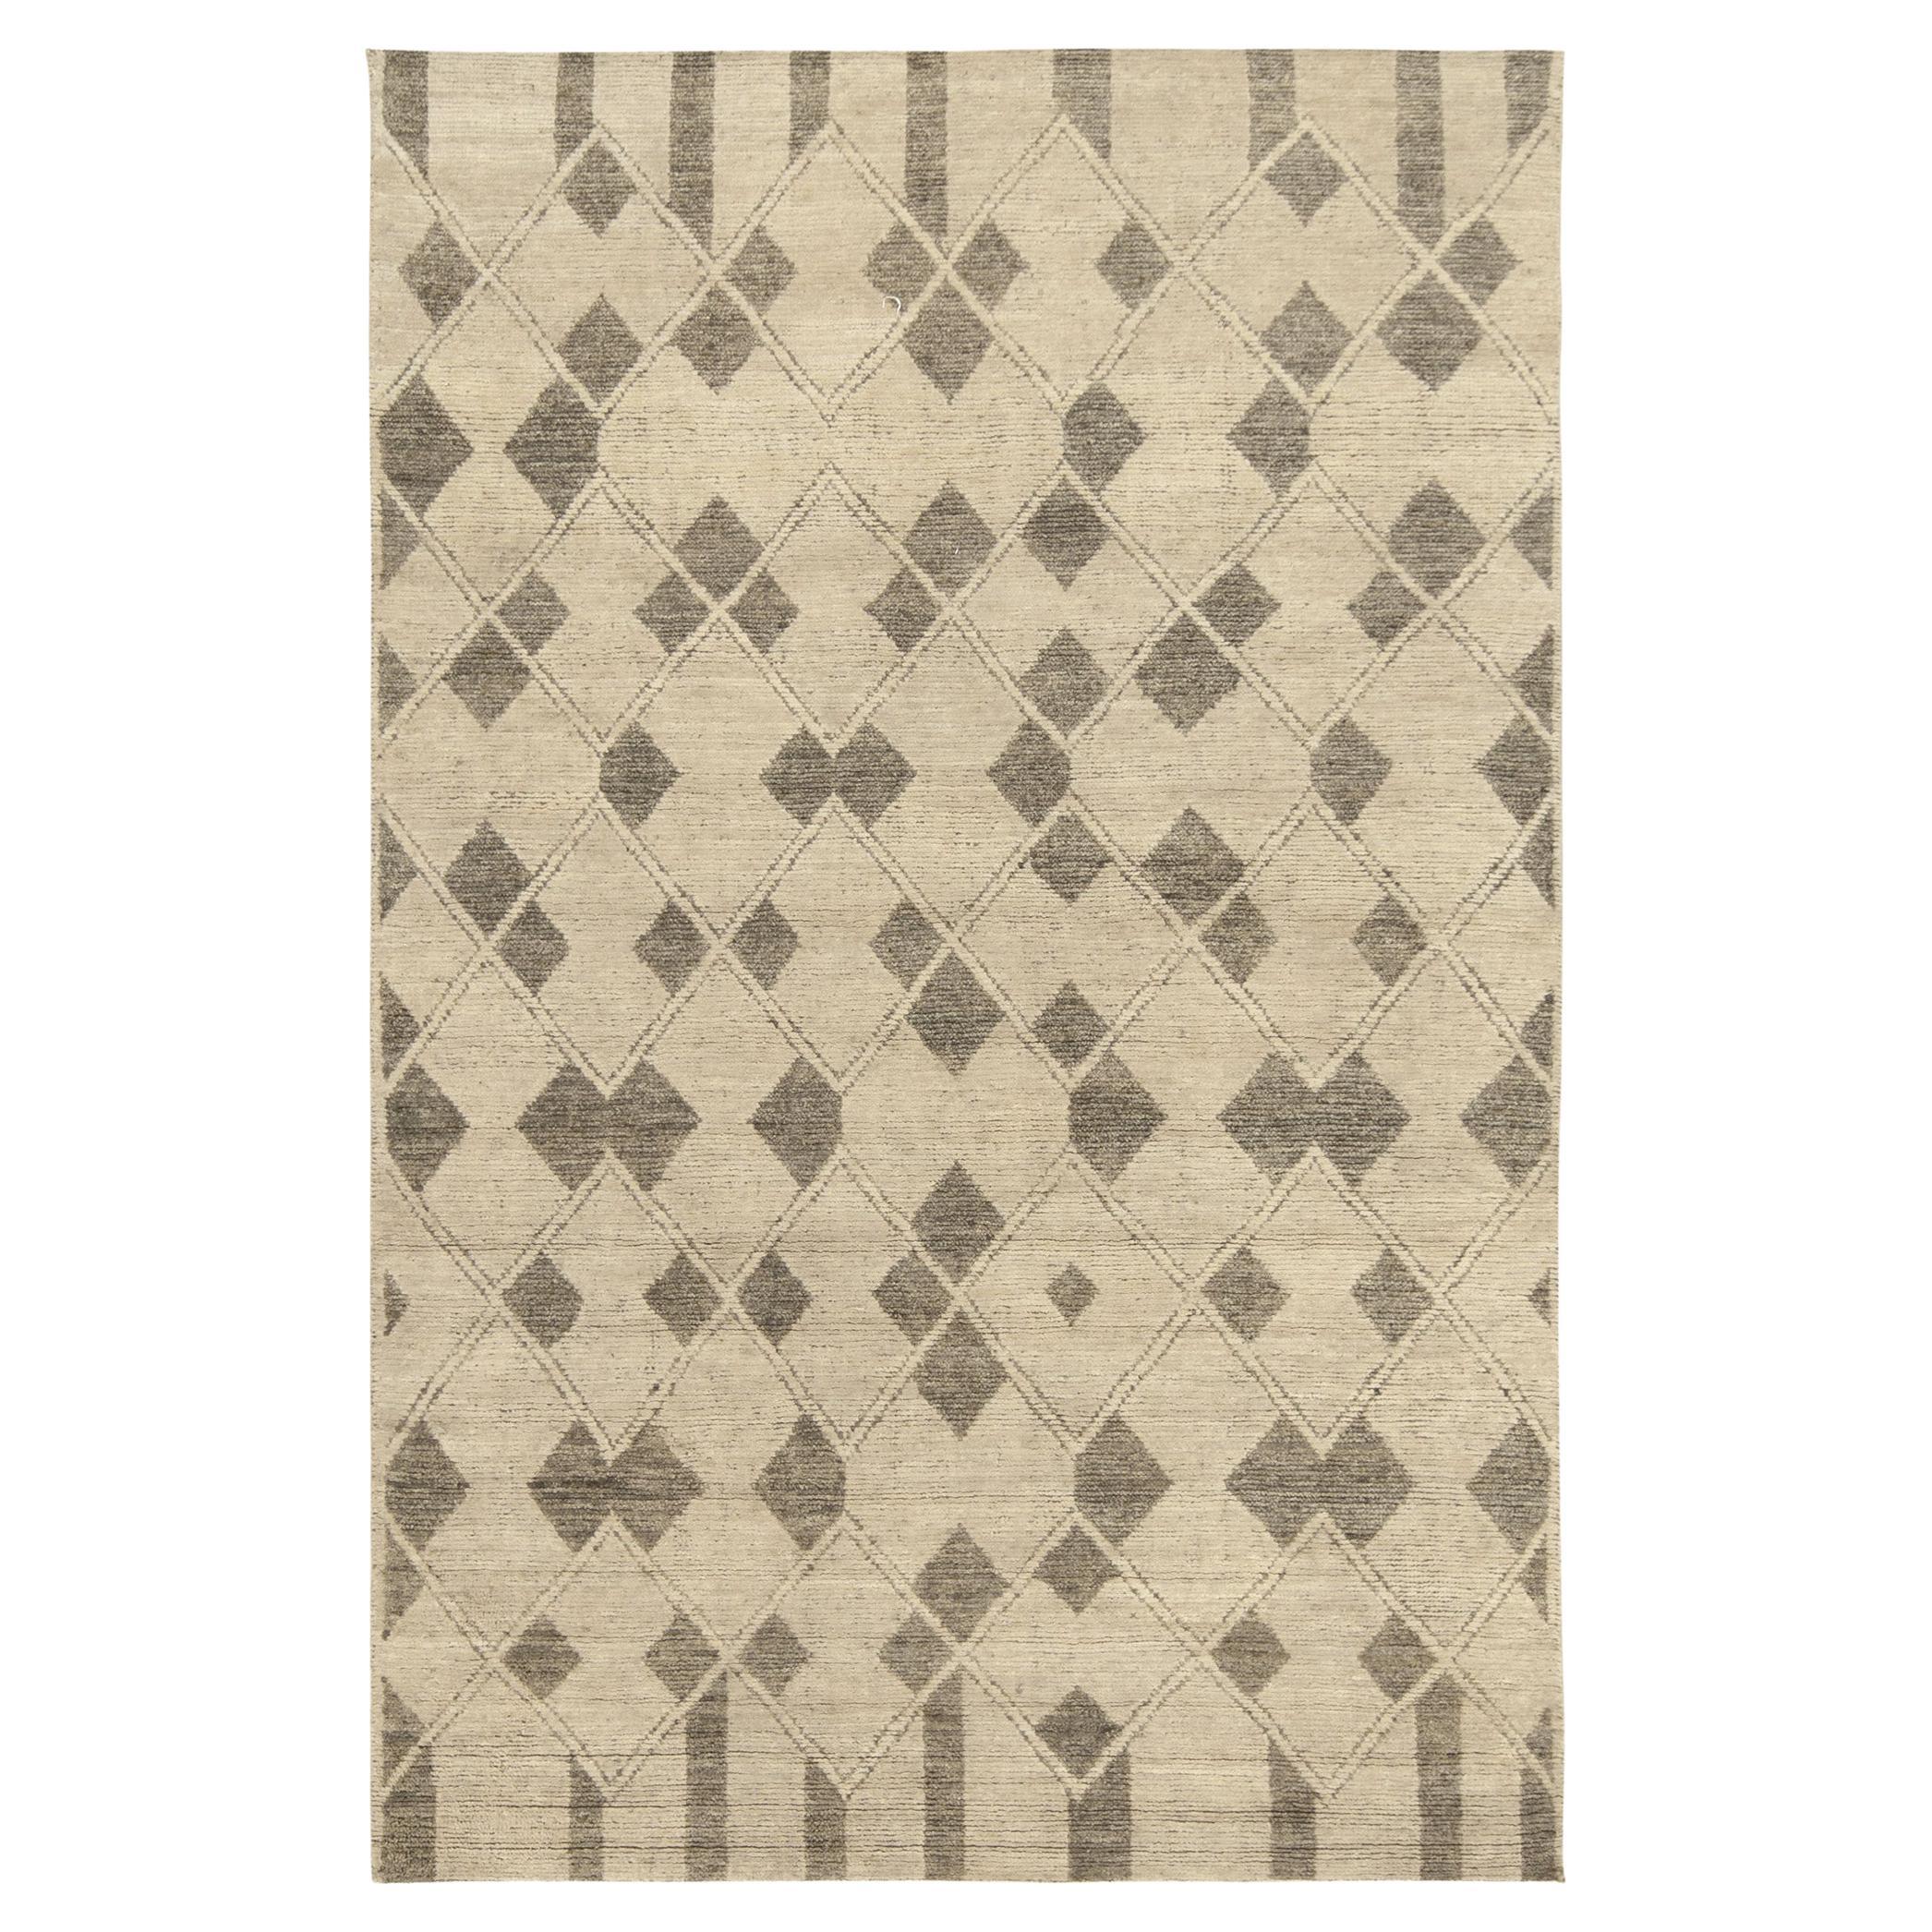 Rug & Kilim’s Moroccan Style Rug in Beige-Brown Diamond Patterns For Sale